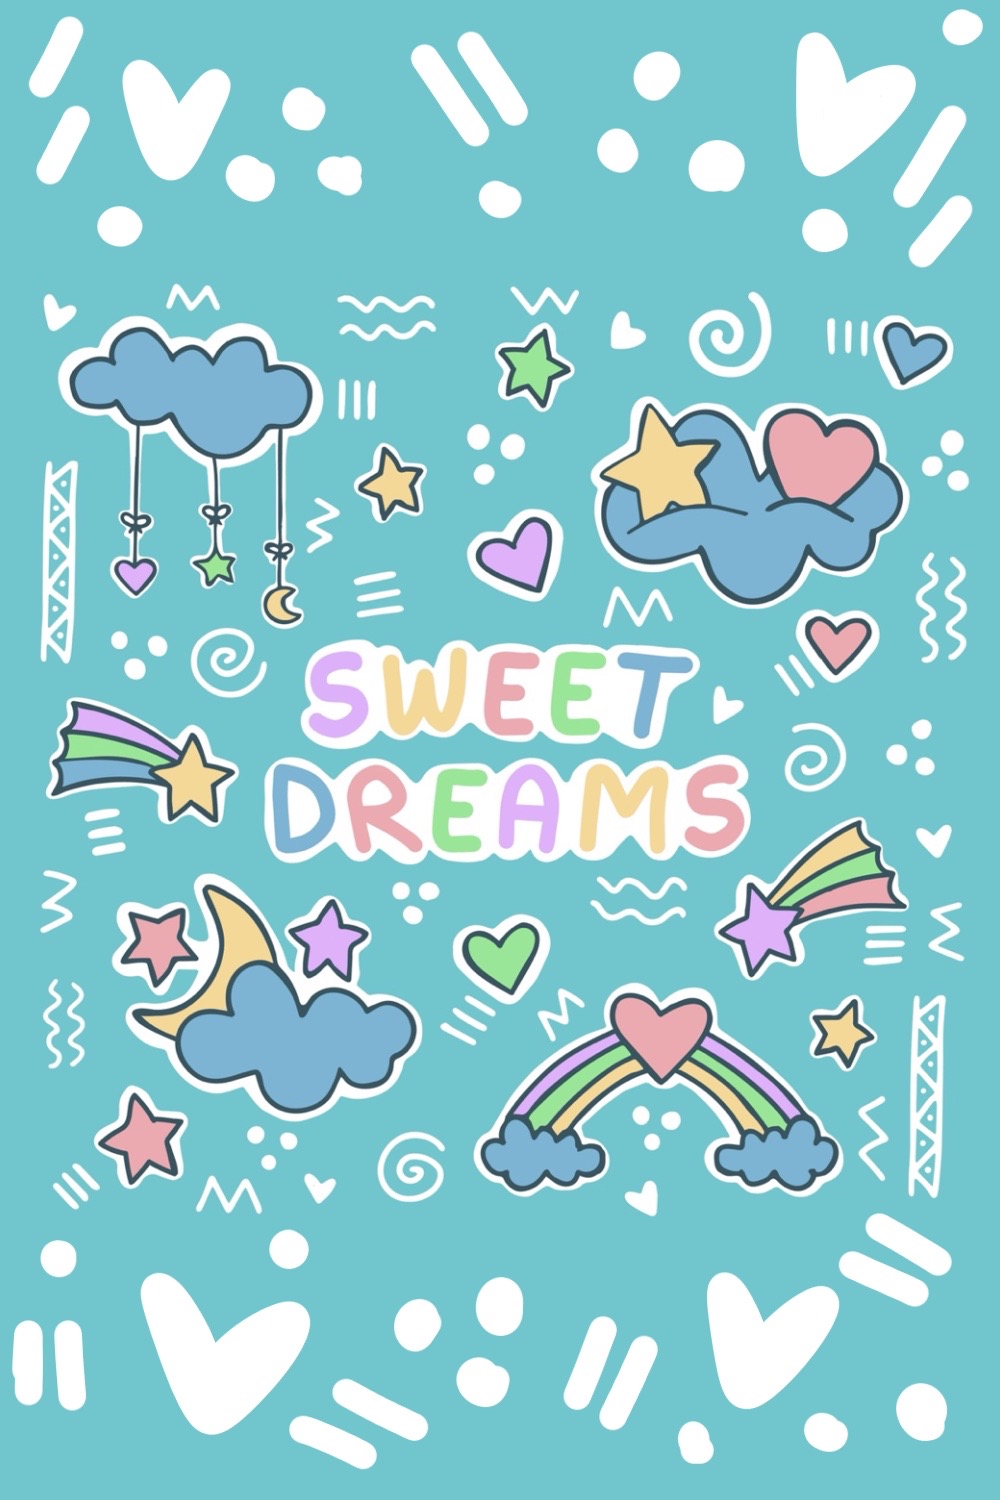 Sweet Dreams Baby Stickers and Posters pinterest image.